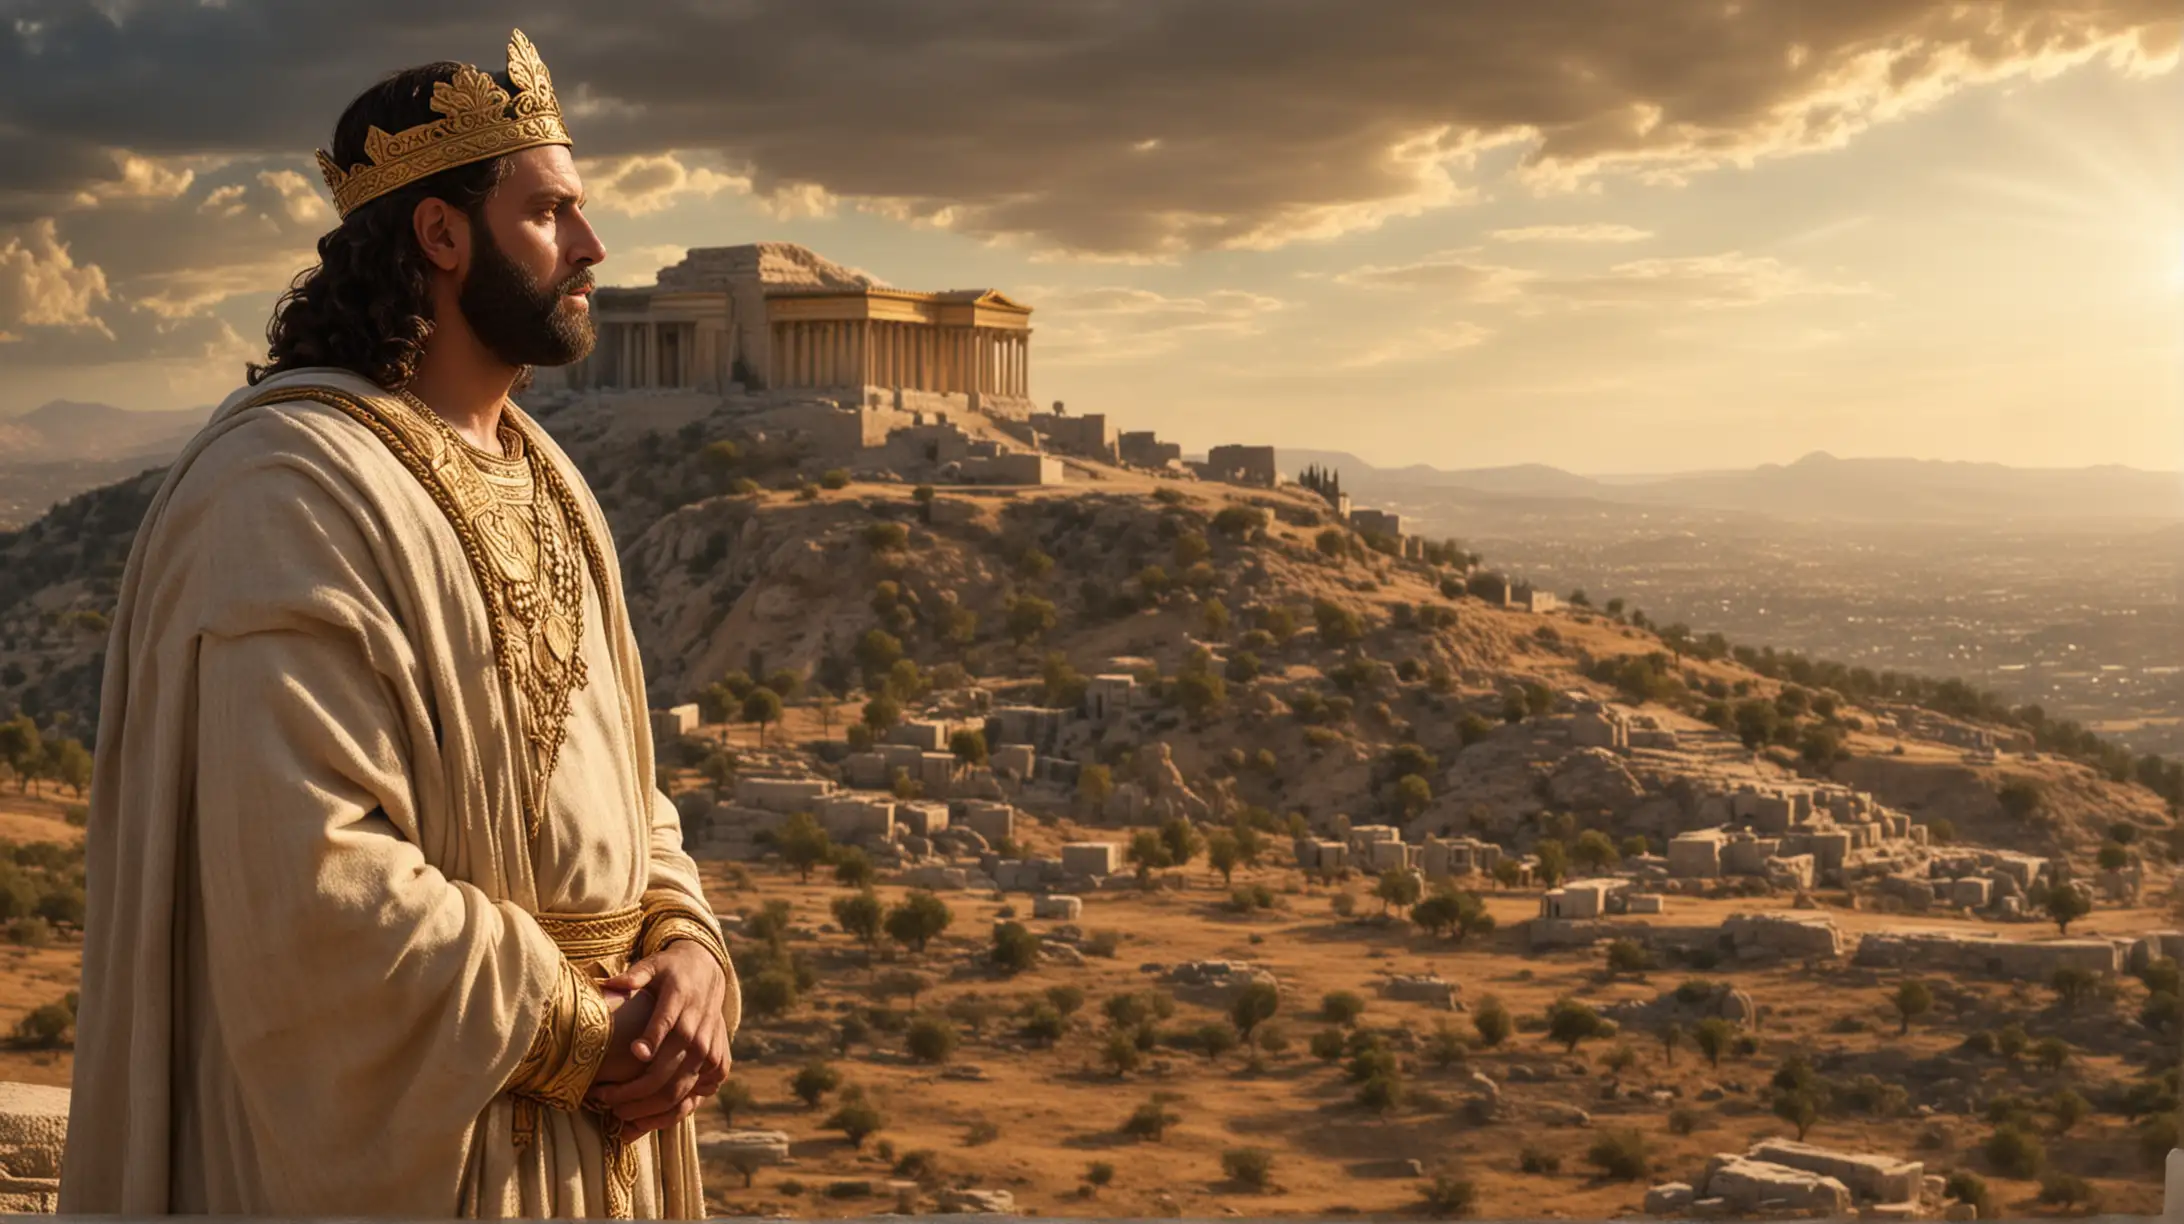 A 40 year old handsome Biblical King Solomon speaking to God on a hill. In the background you can see a Temple. Set during the biblical era of King Solomon.